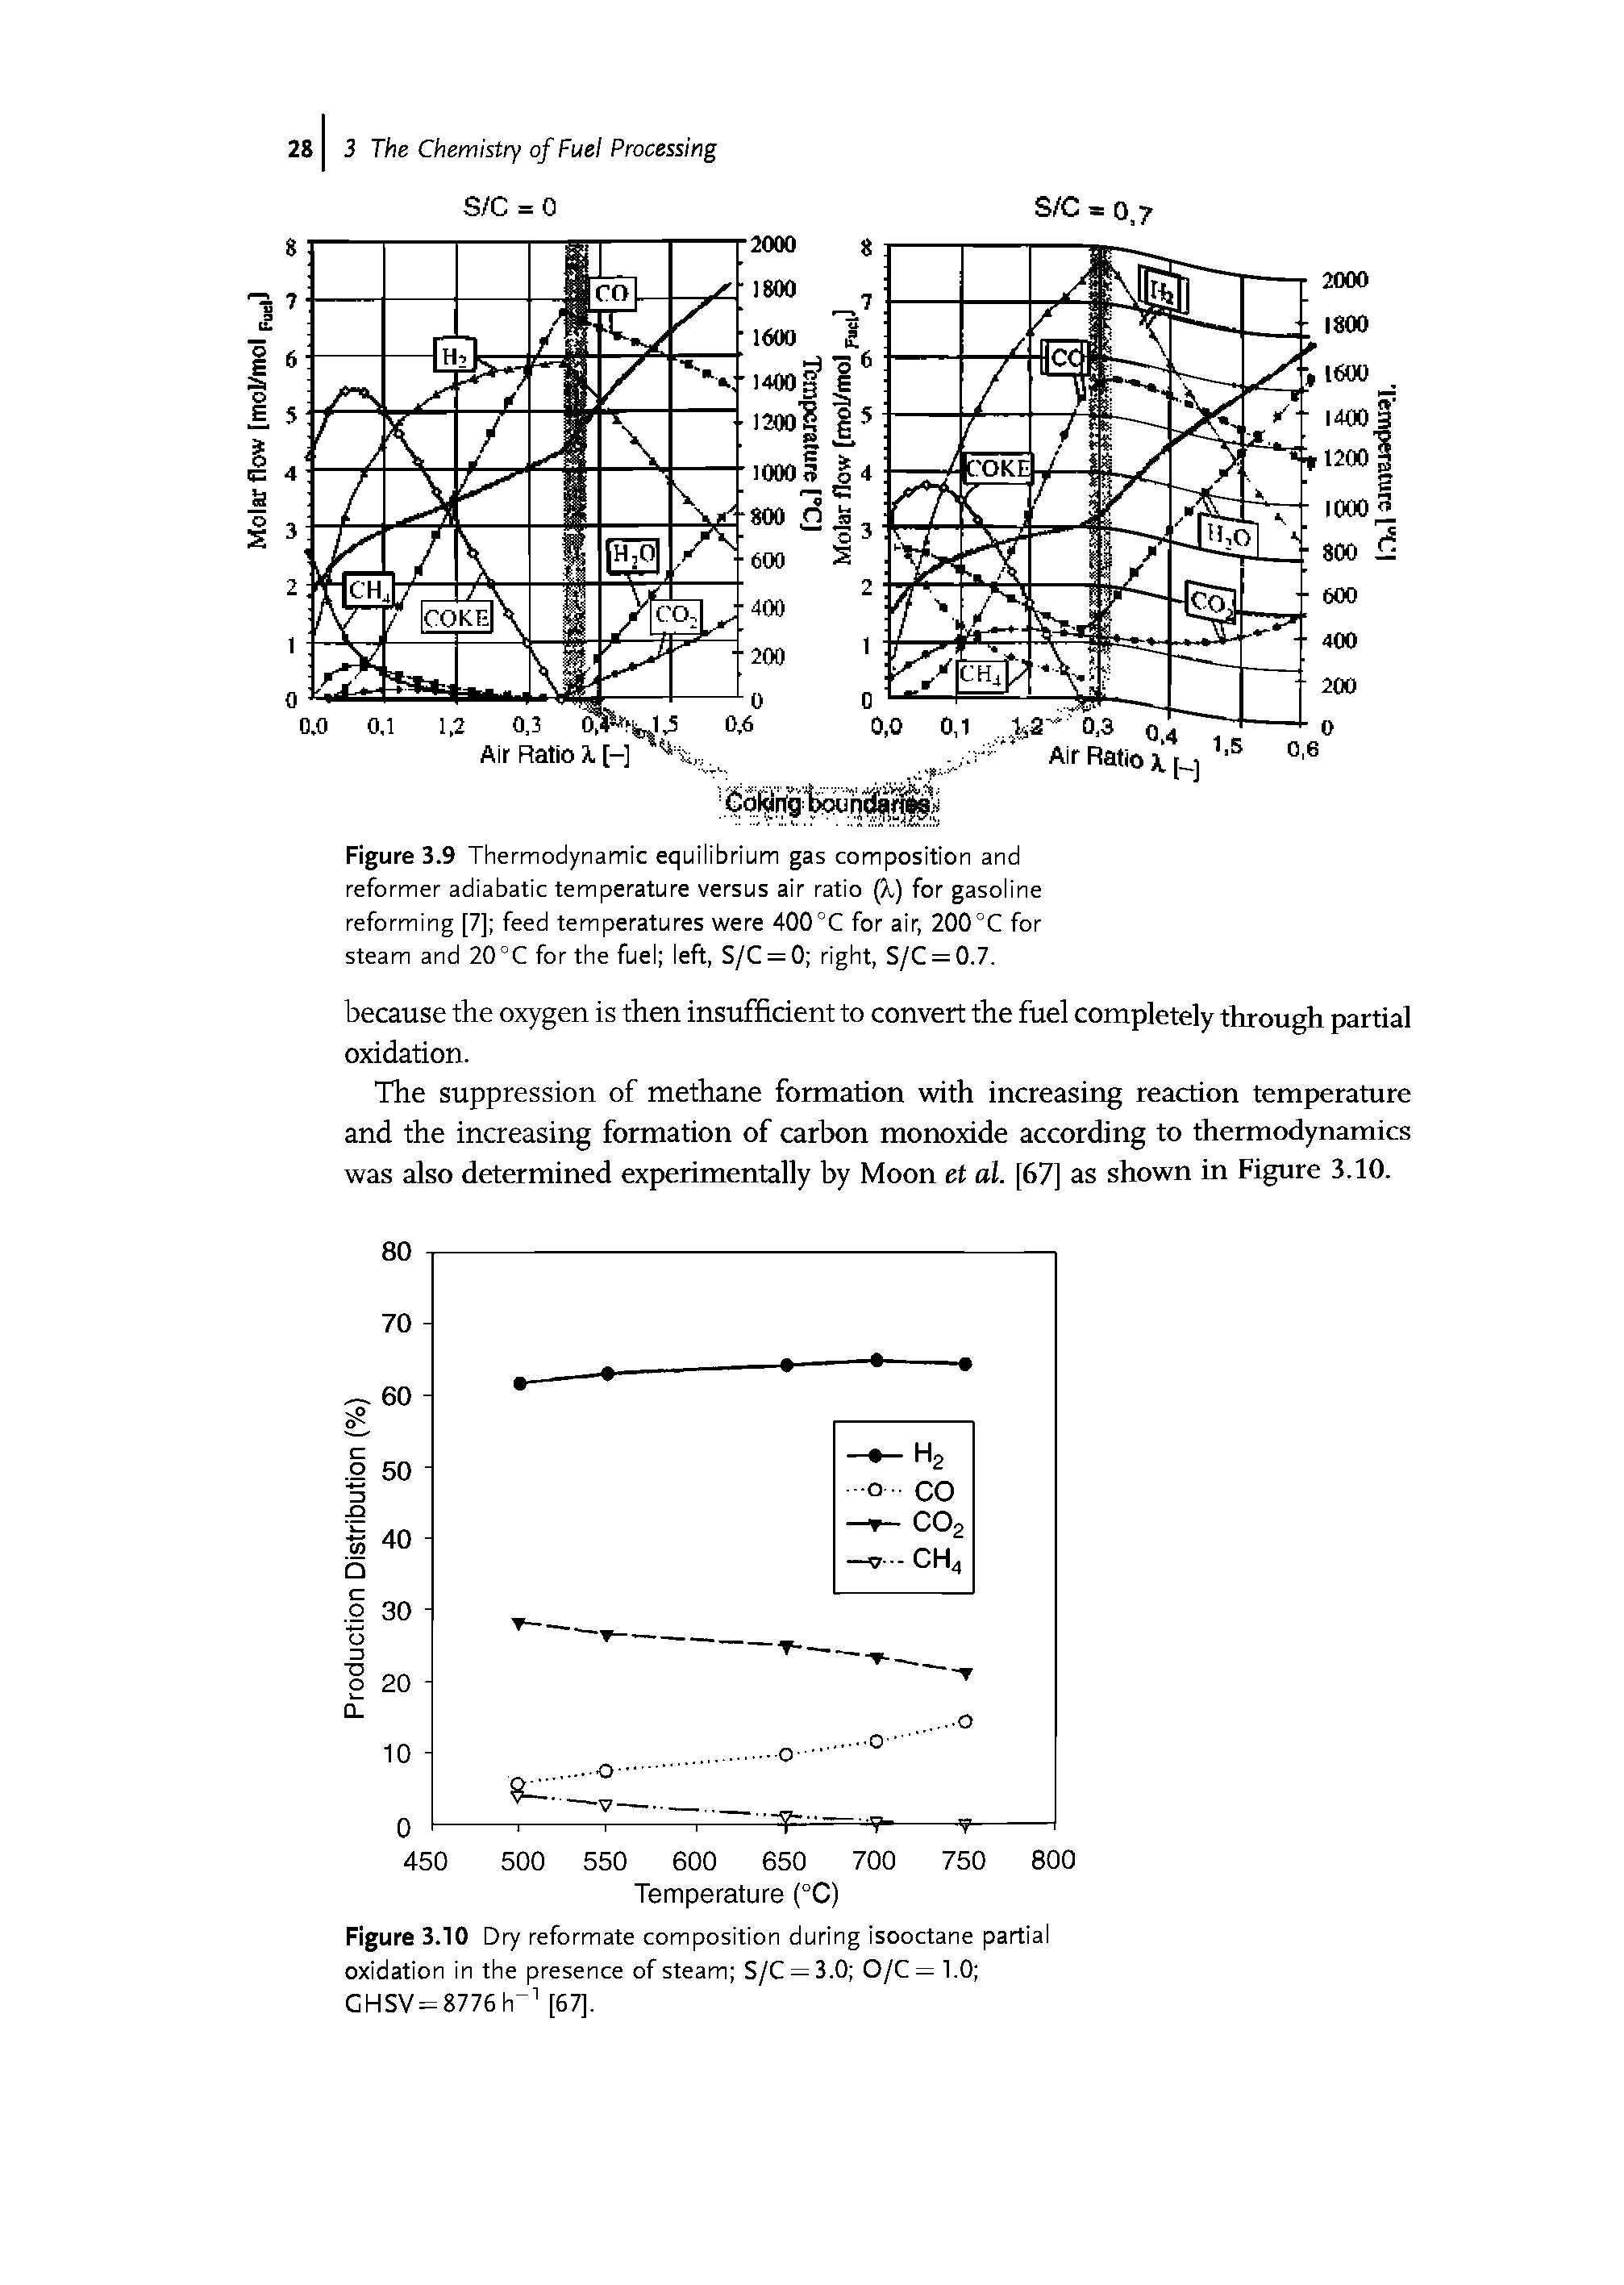 Figure 3.9 Thermodynamic equilibrium gas composition and reformer adiabatic temperature versus air ratio (X) for gasoline reforming [7] feed temperatures were 400°C for air, 200°C for steam and 20°C for the fuel left, S/C = 0 right, S/C = 0.7.